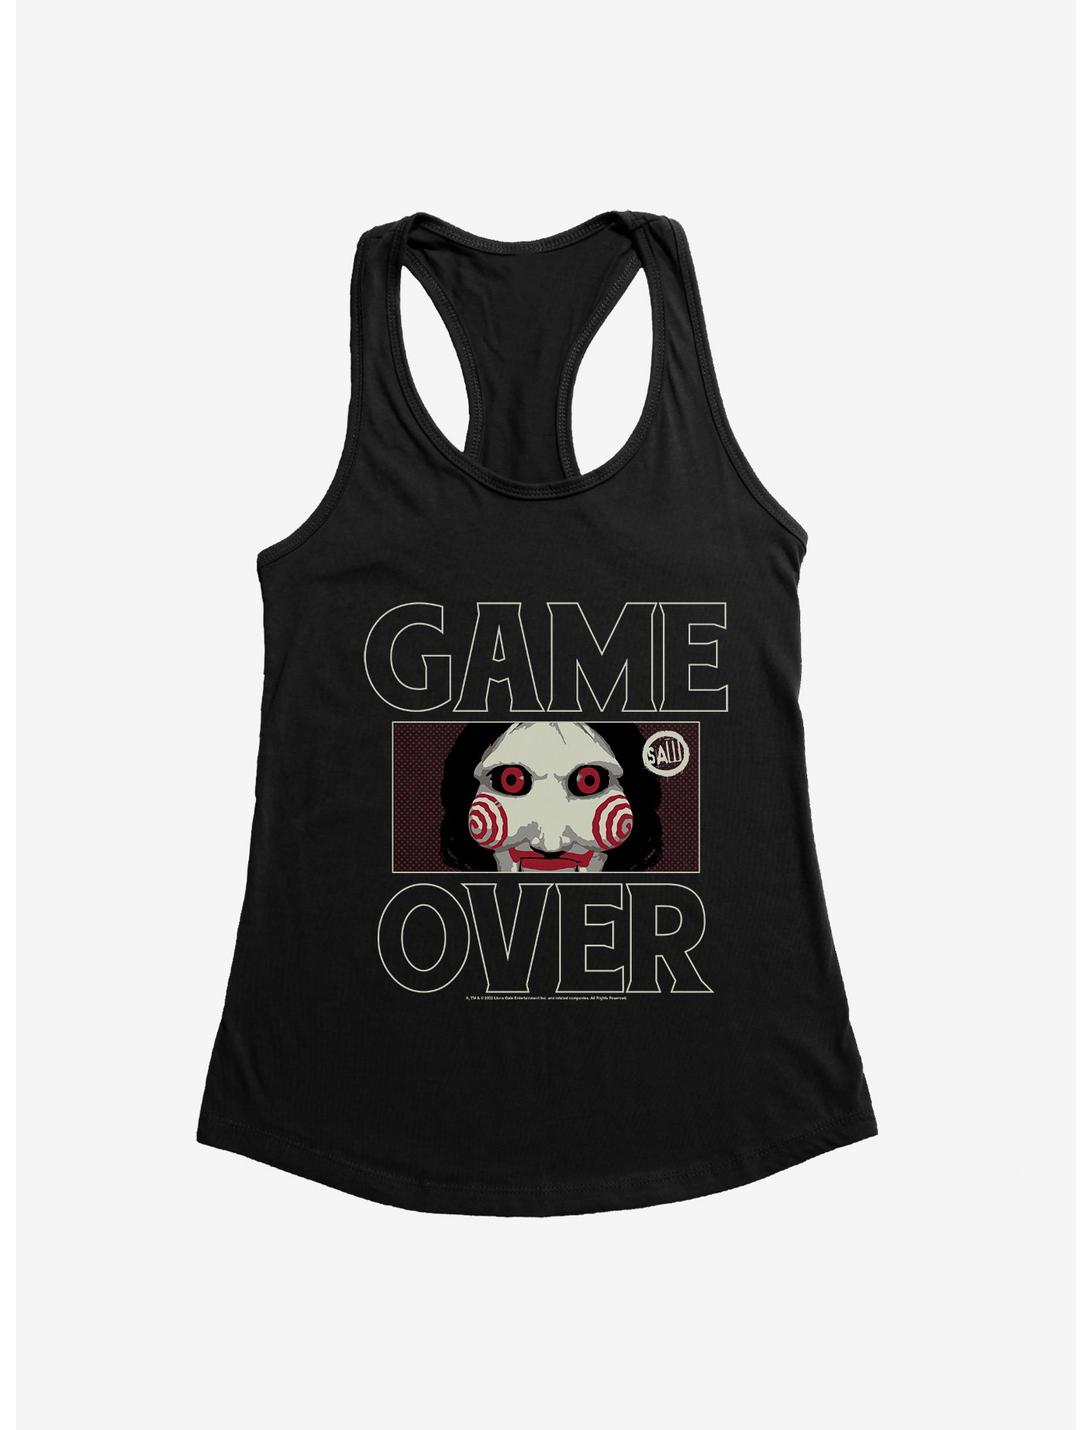 Saw Game Over Womens Tank Top, BLACK, hi-res